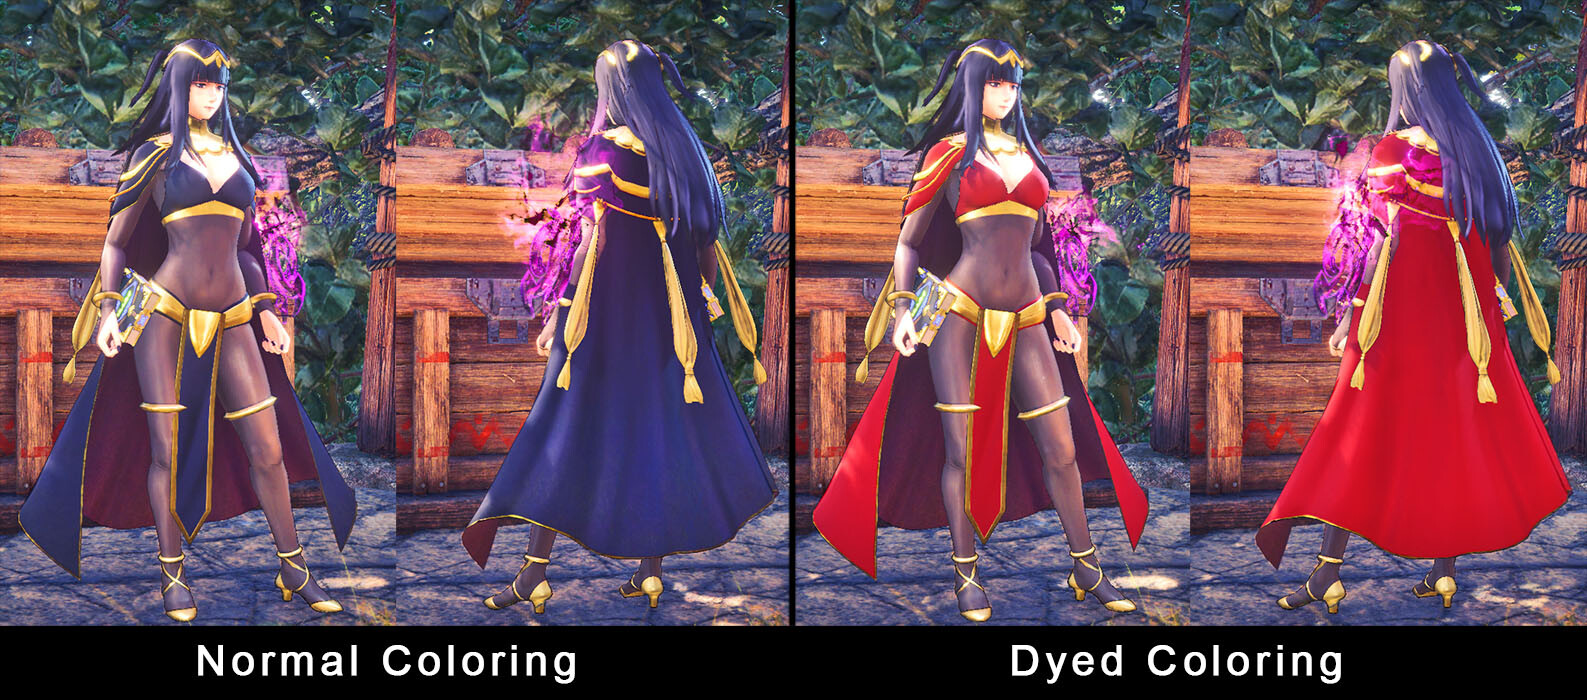 Showing off dye capability for further customization.